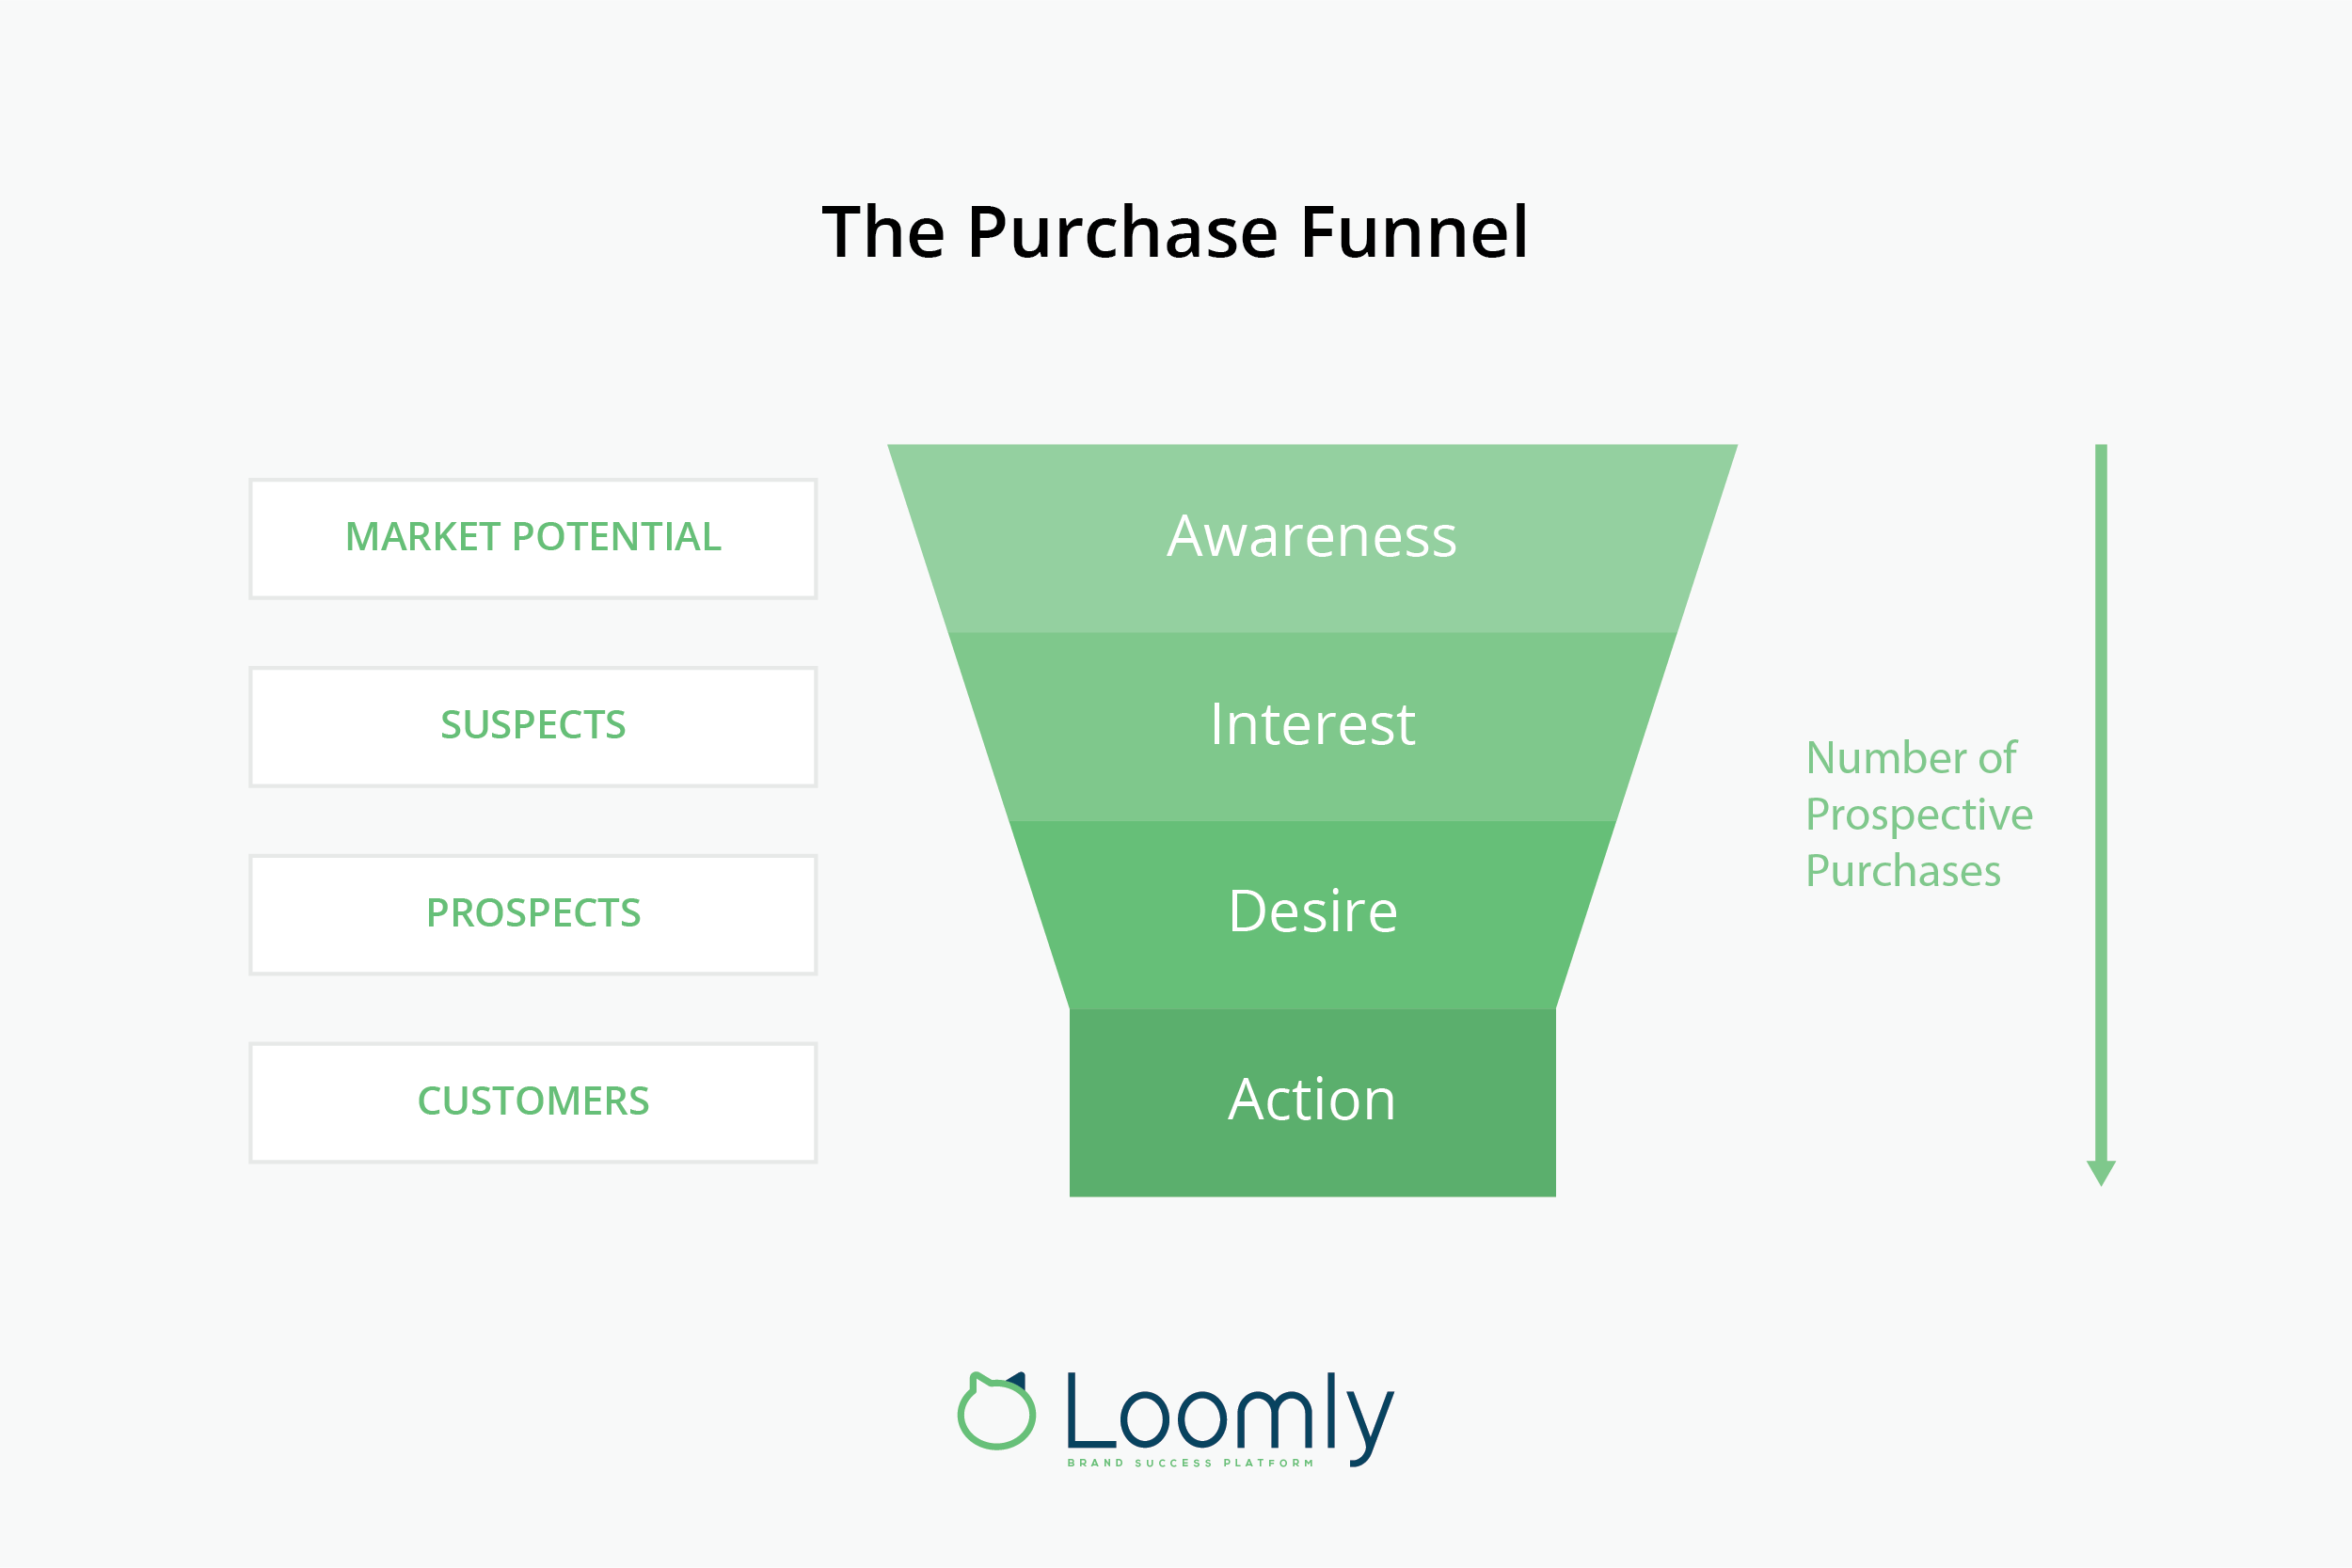 Brand consistency the purchase funnel Loomly